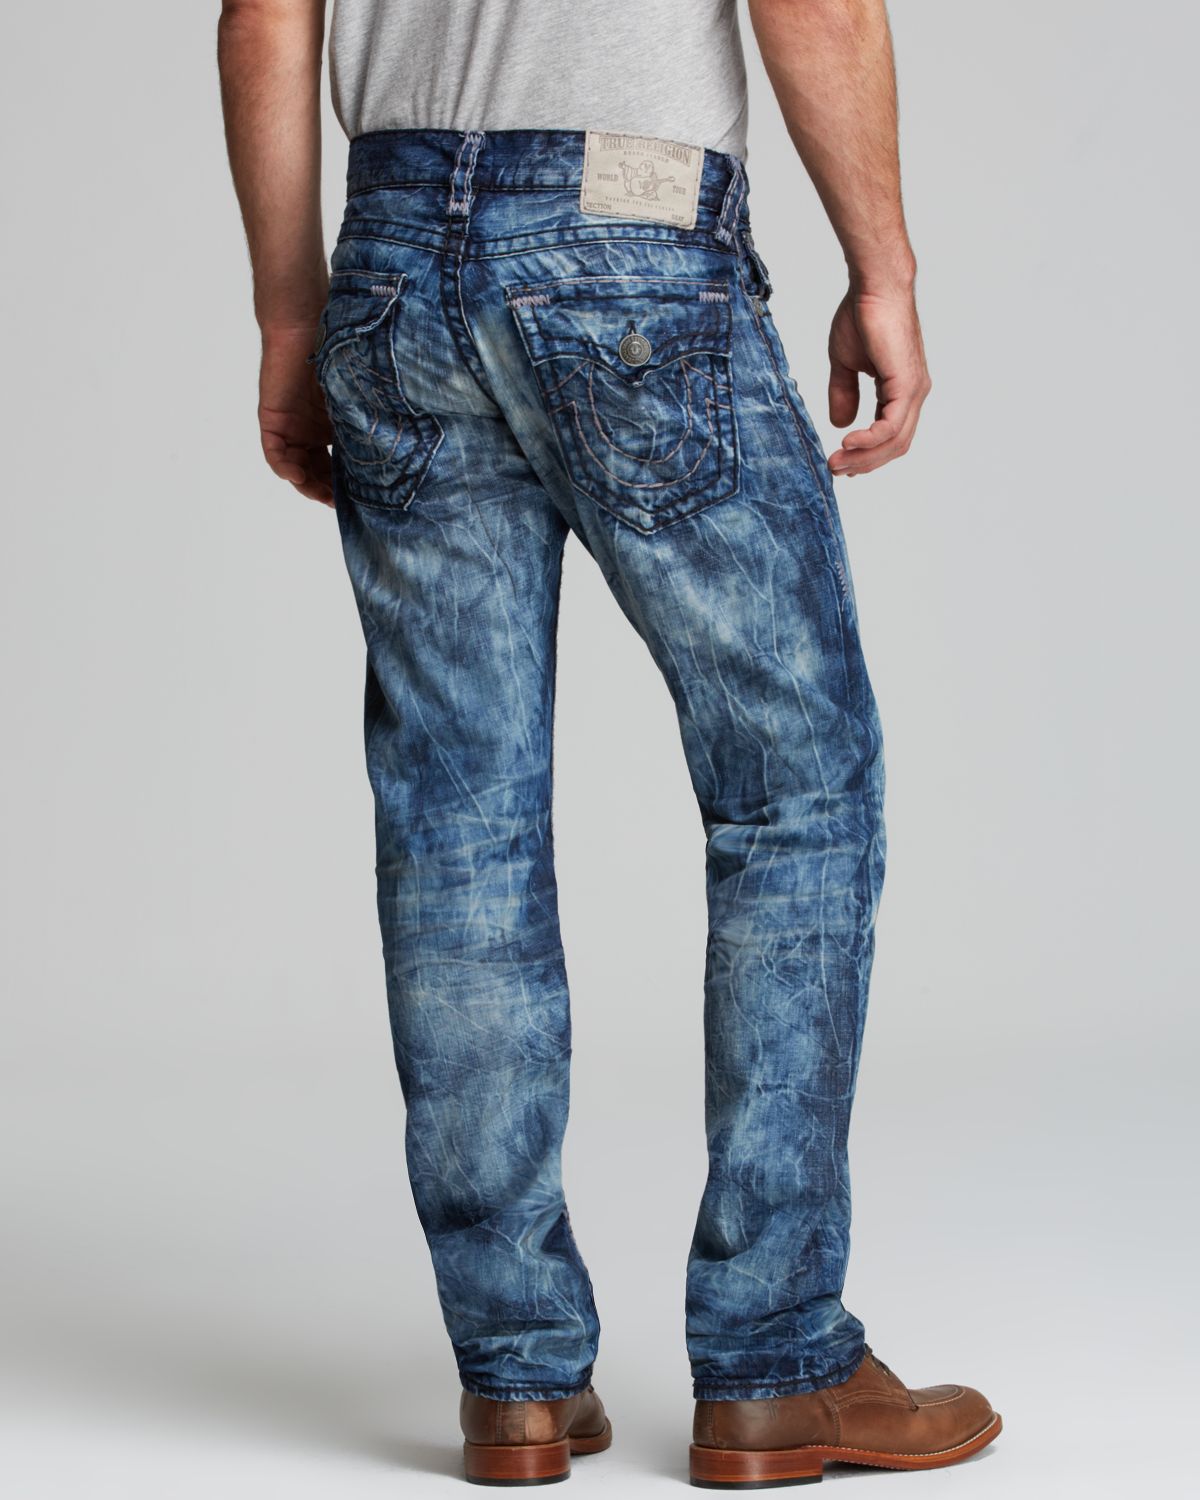 Lyst - True religion Jeans Ricky Super T Straight Fit in Foster City in ...